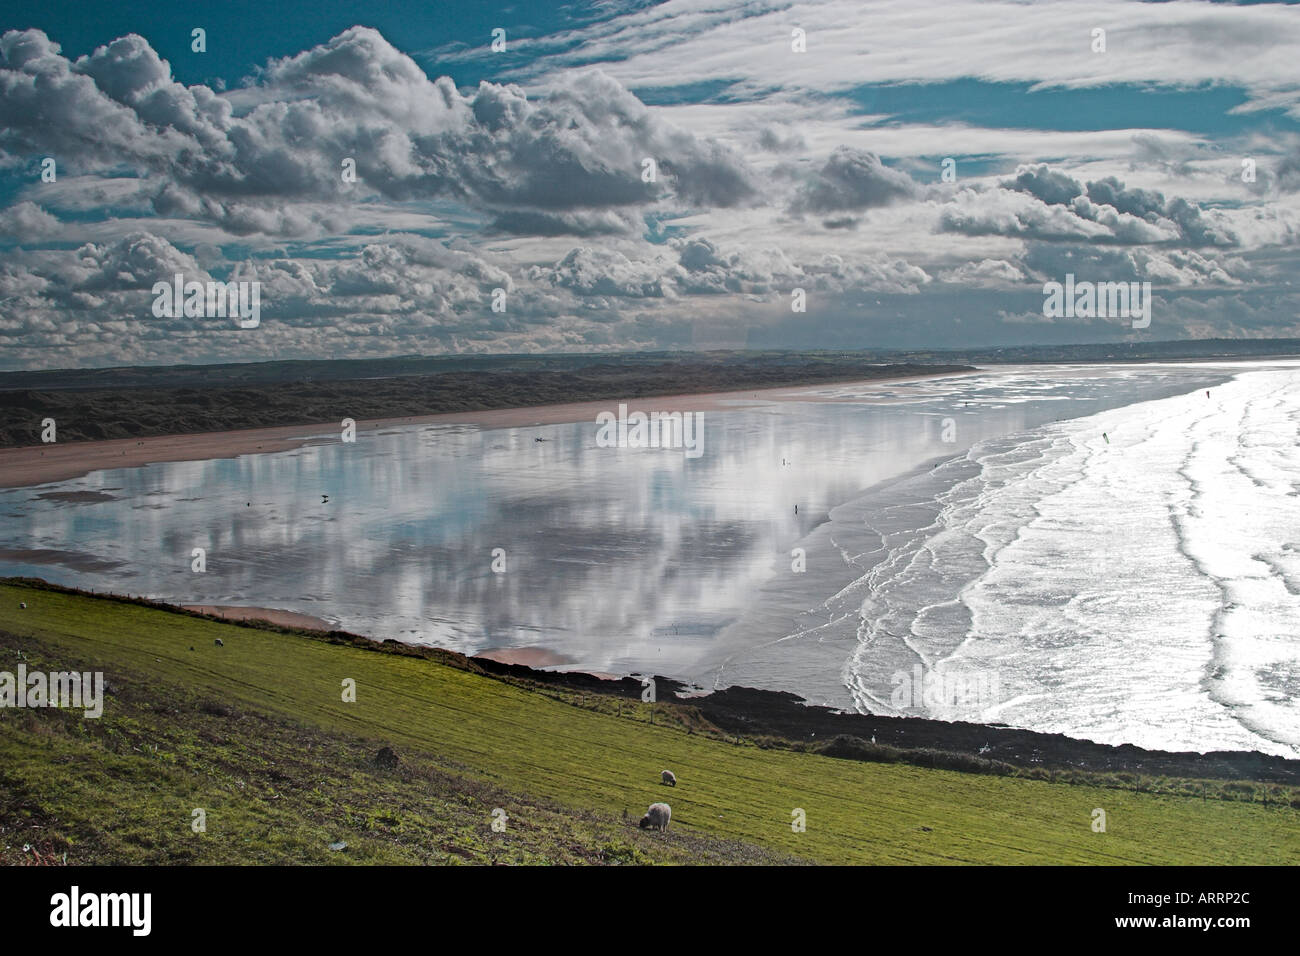 Reflections of the clouds in the wet sand at low tide. Stock Photo